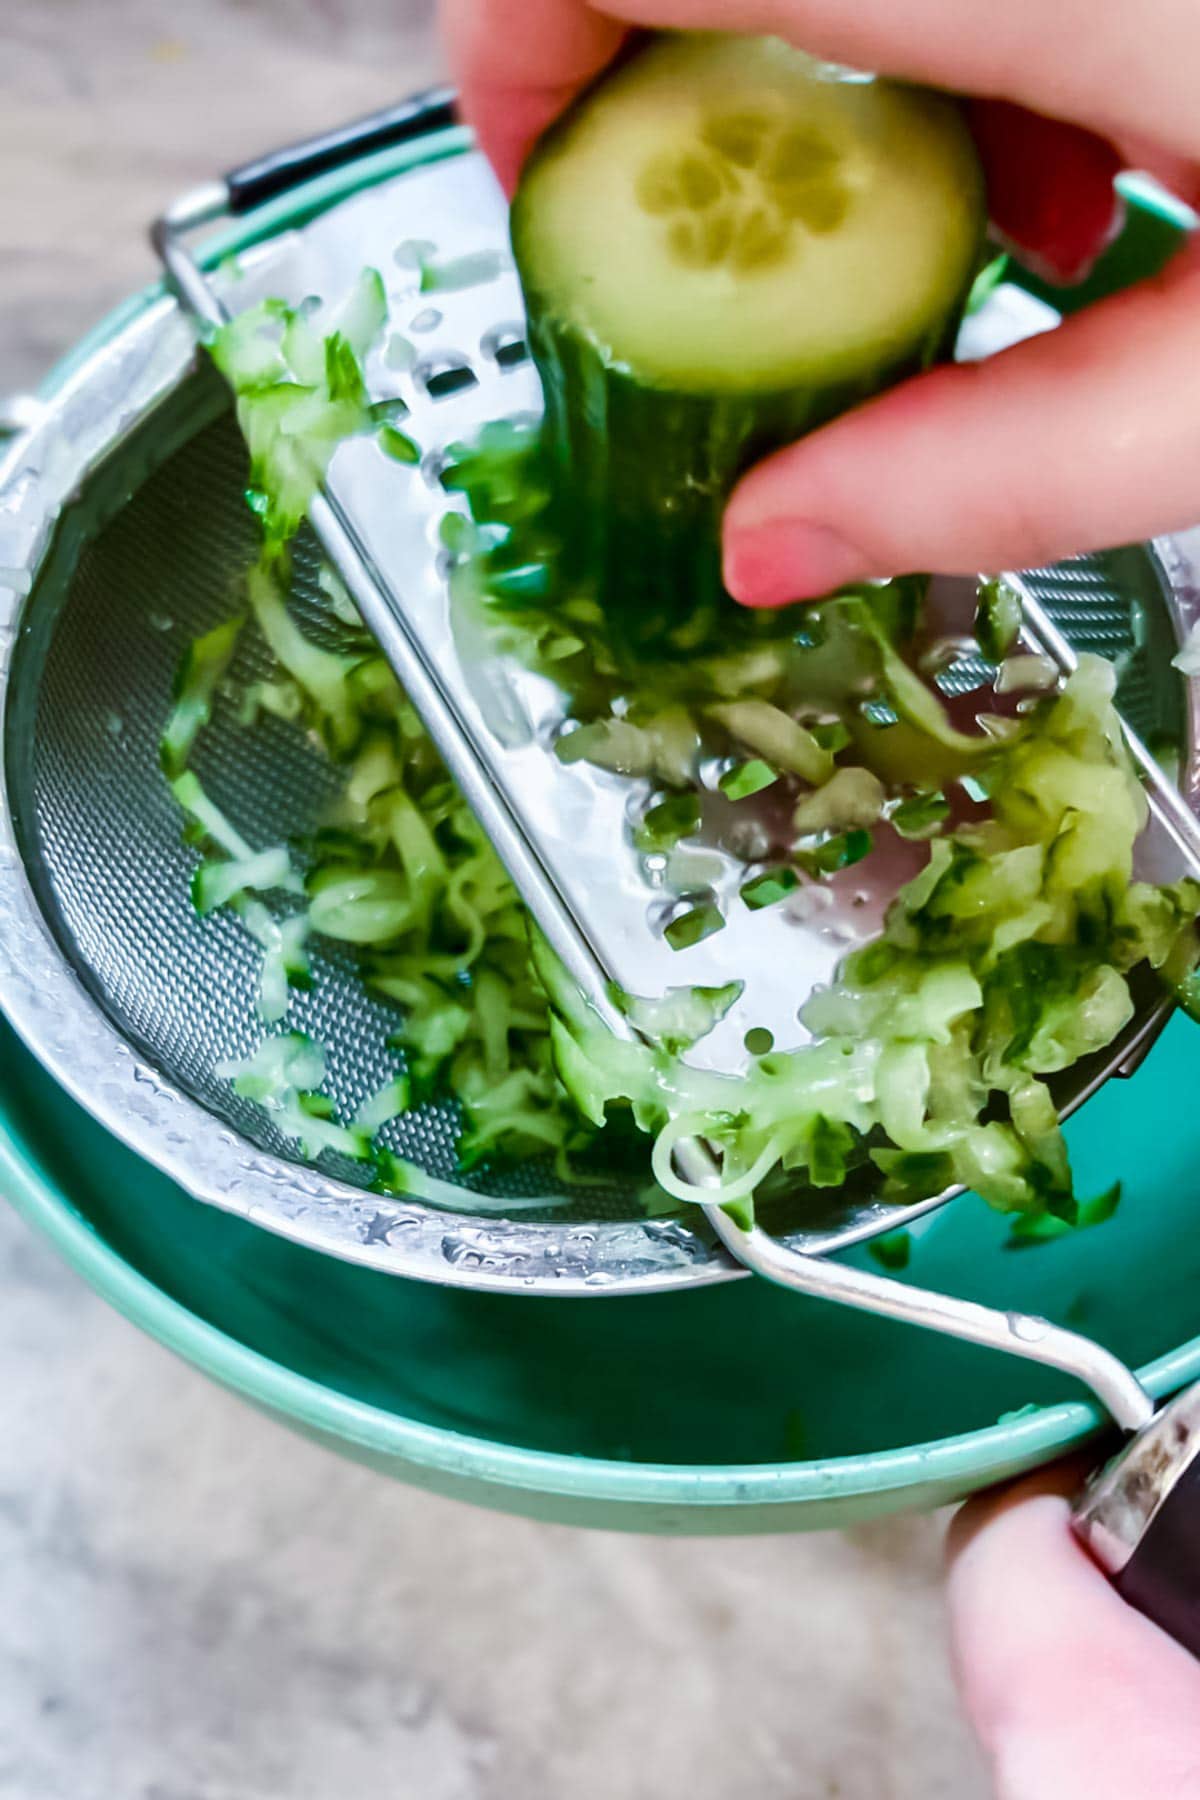 Step by step photos of how to make tzatziki sauce: Grating a cucumber.